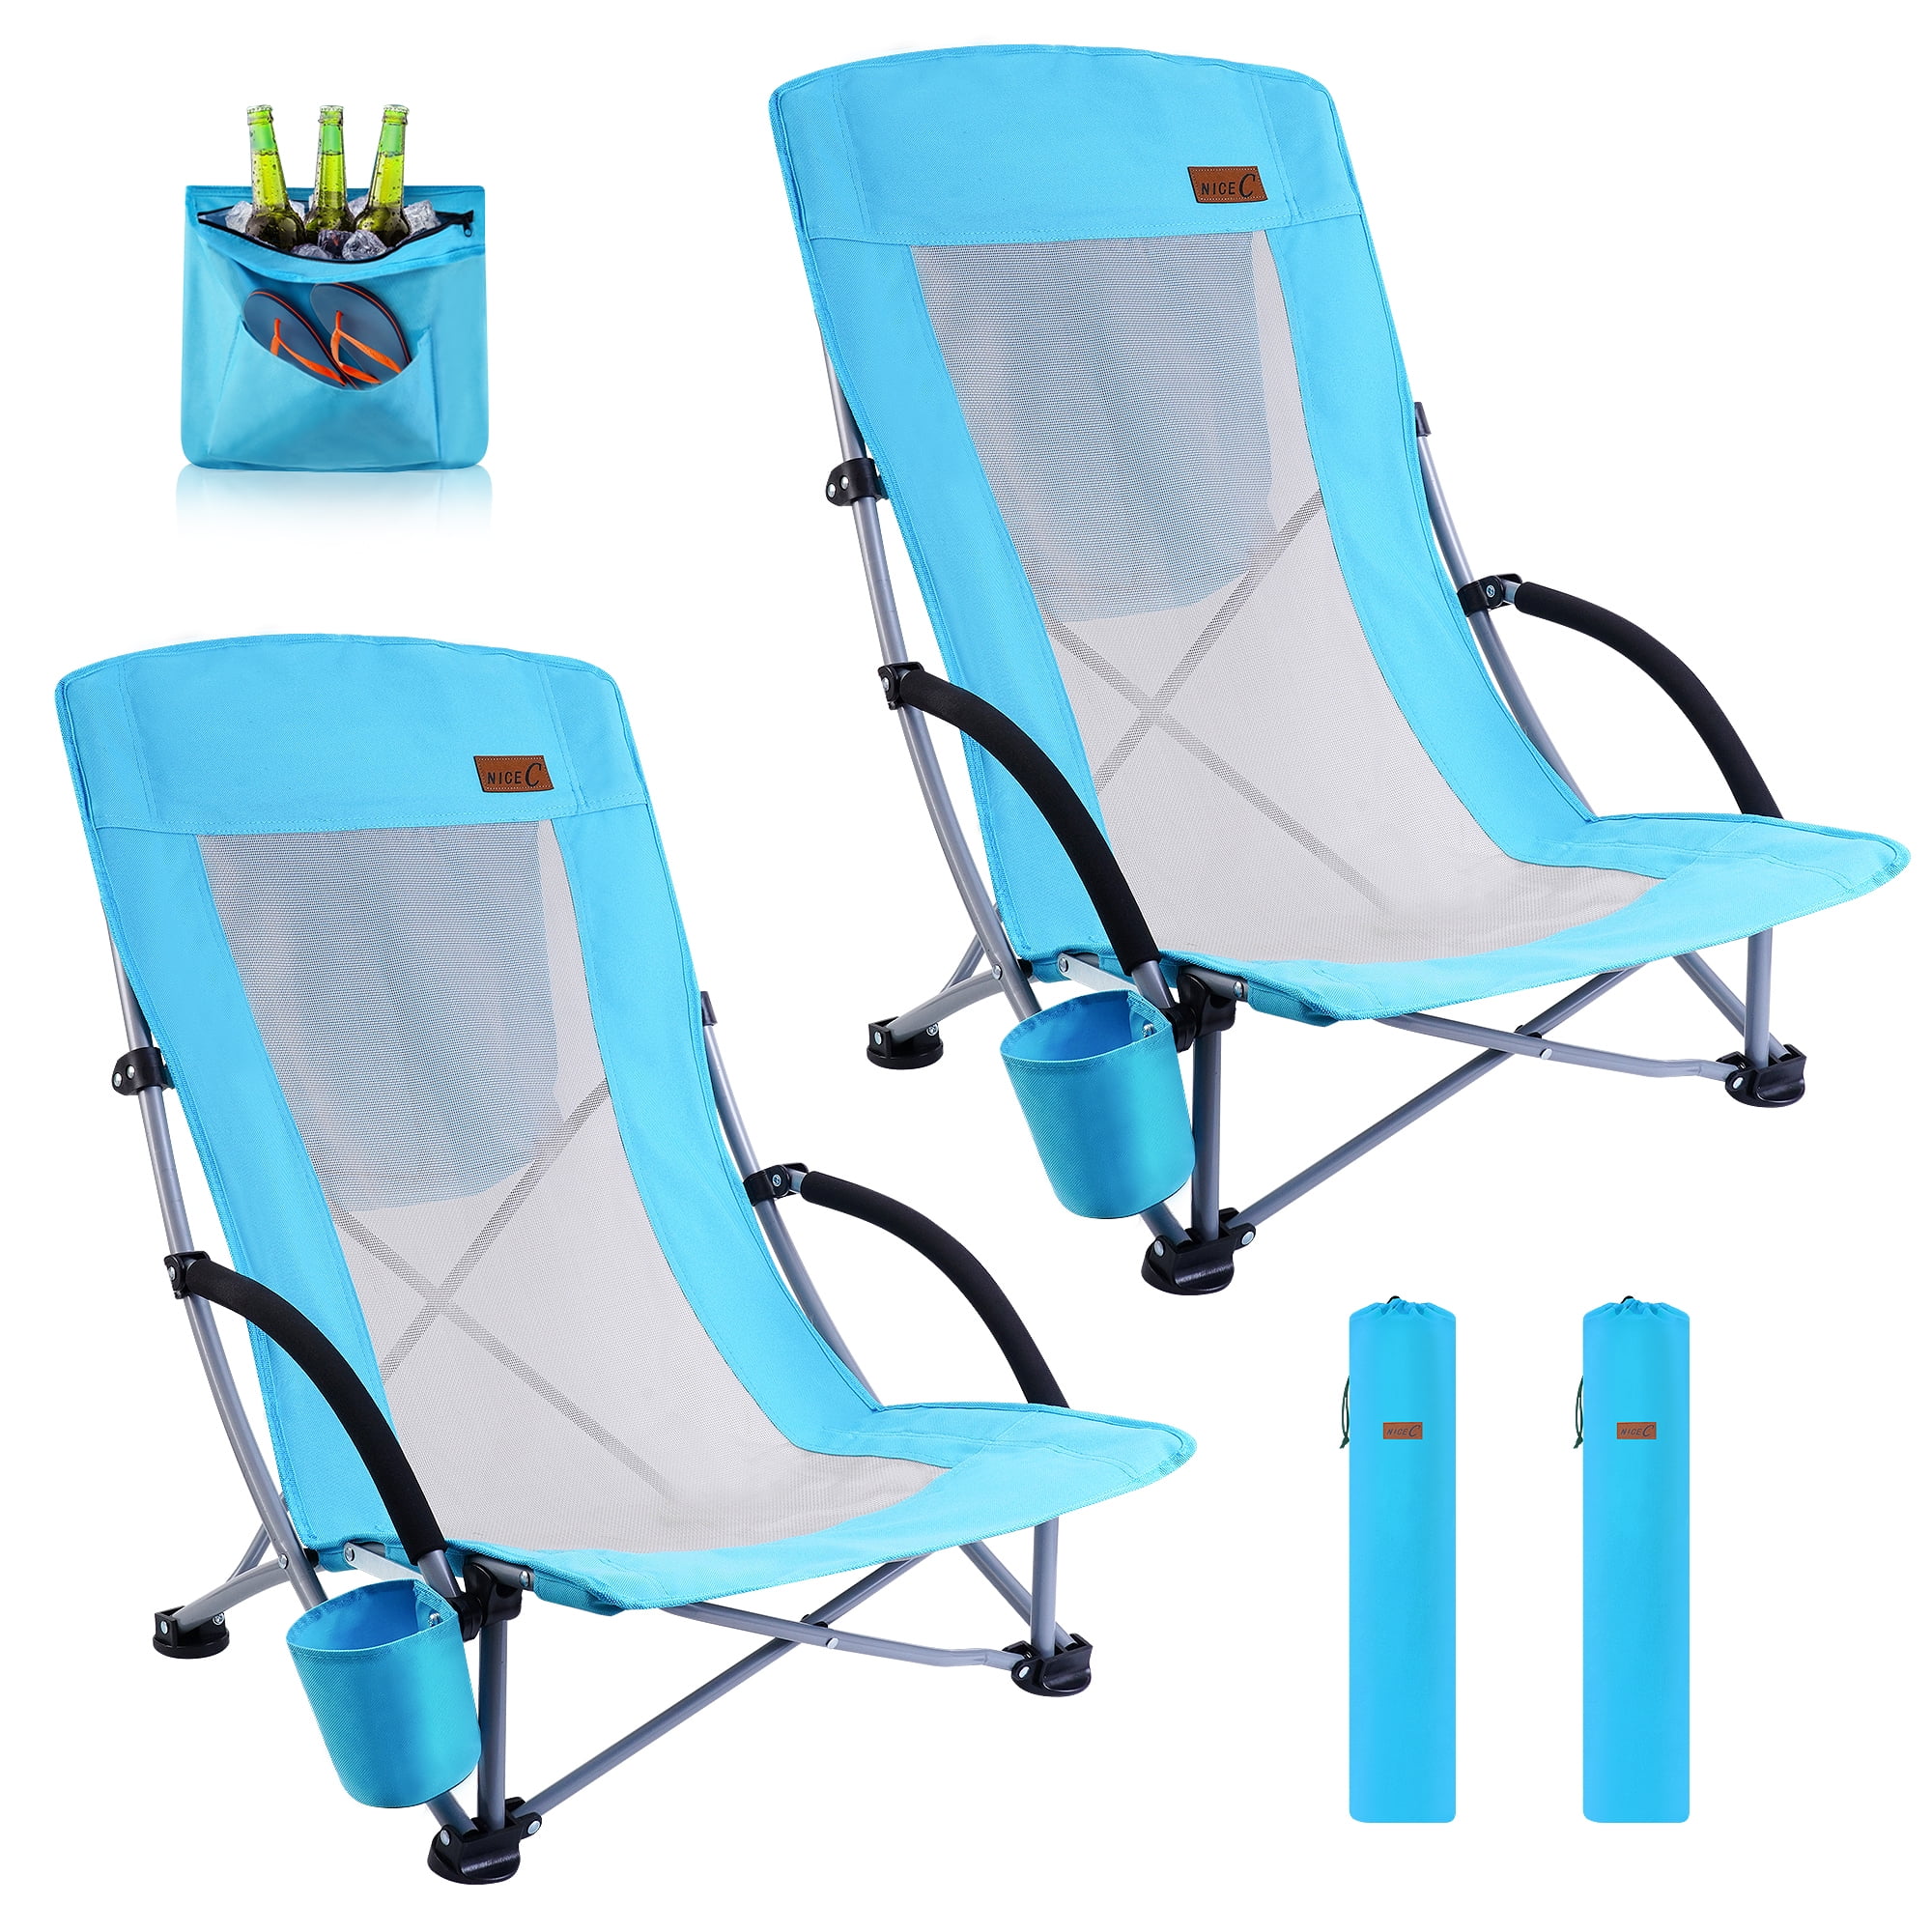 Folding Portable Garden Camping Fishing Festival Folding Chair With Cup Holder 